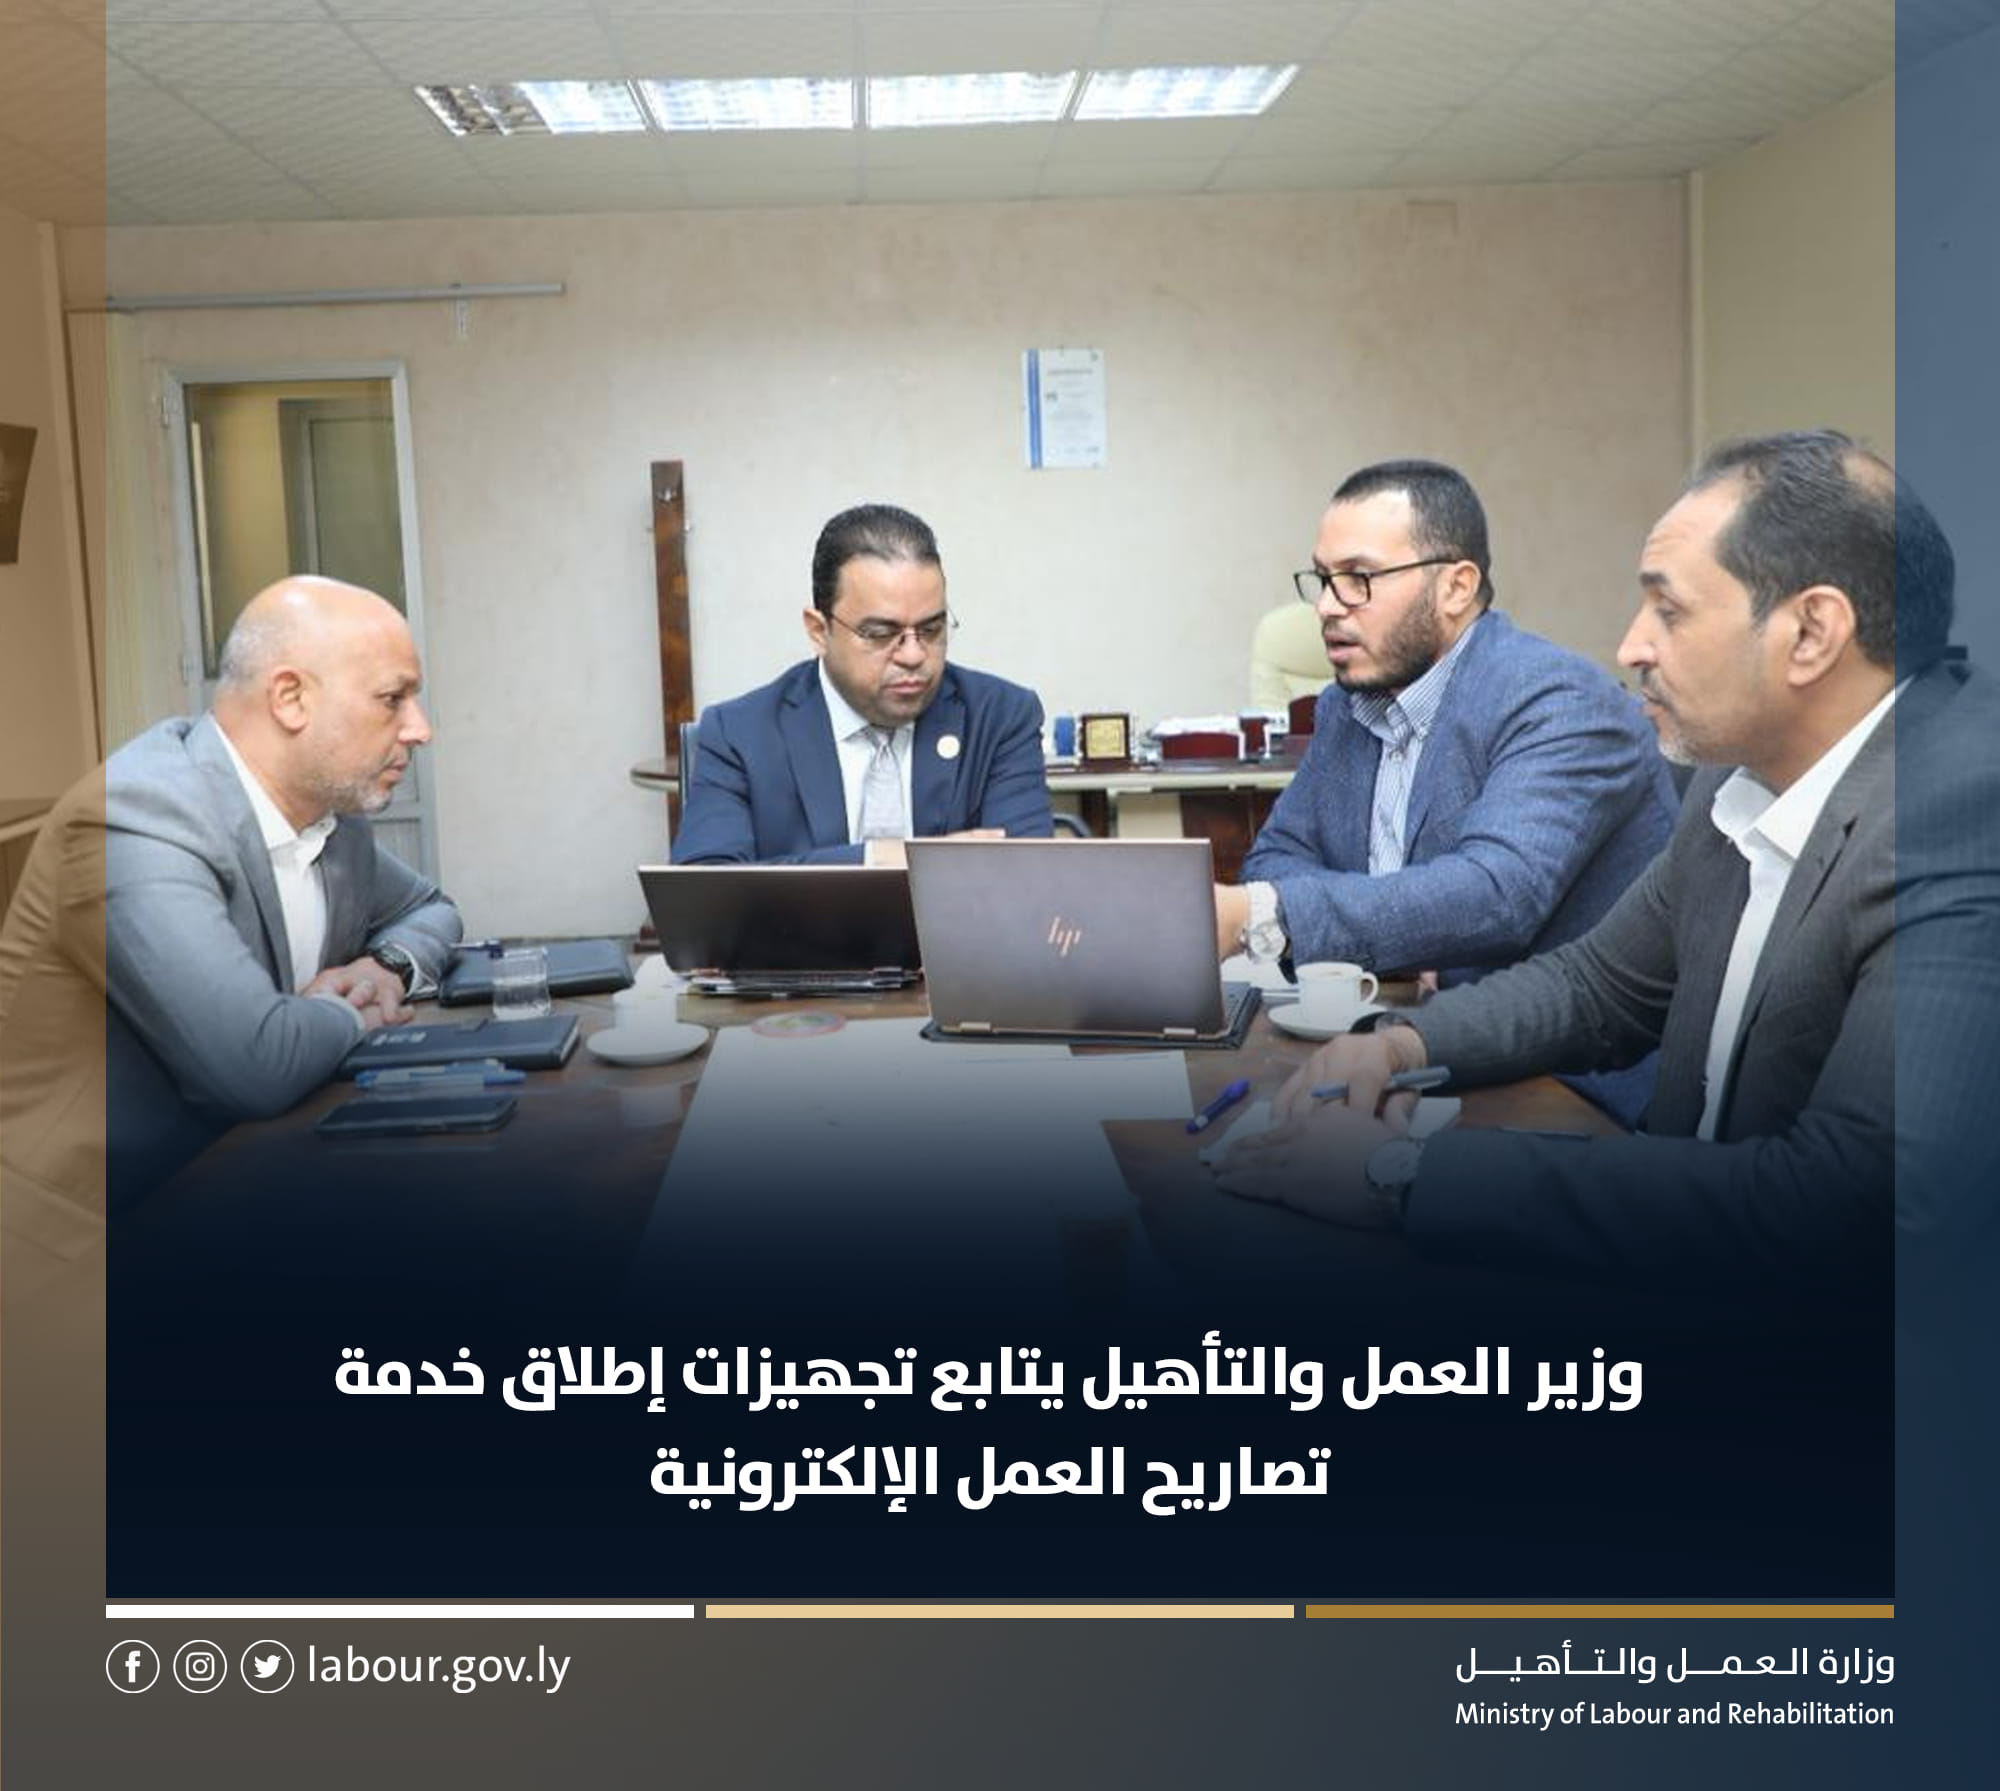 The Minister of Labor and Rehabilitation follows up on preparations for launching the electronic work permit service via the Wafid platform.